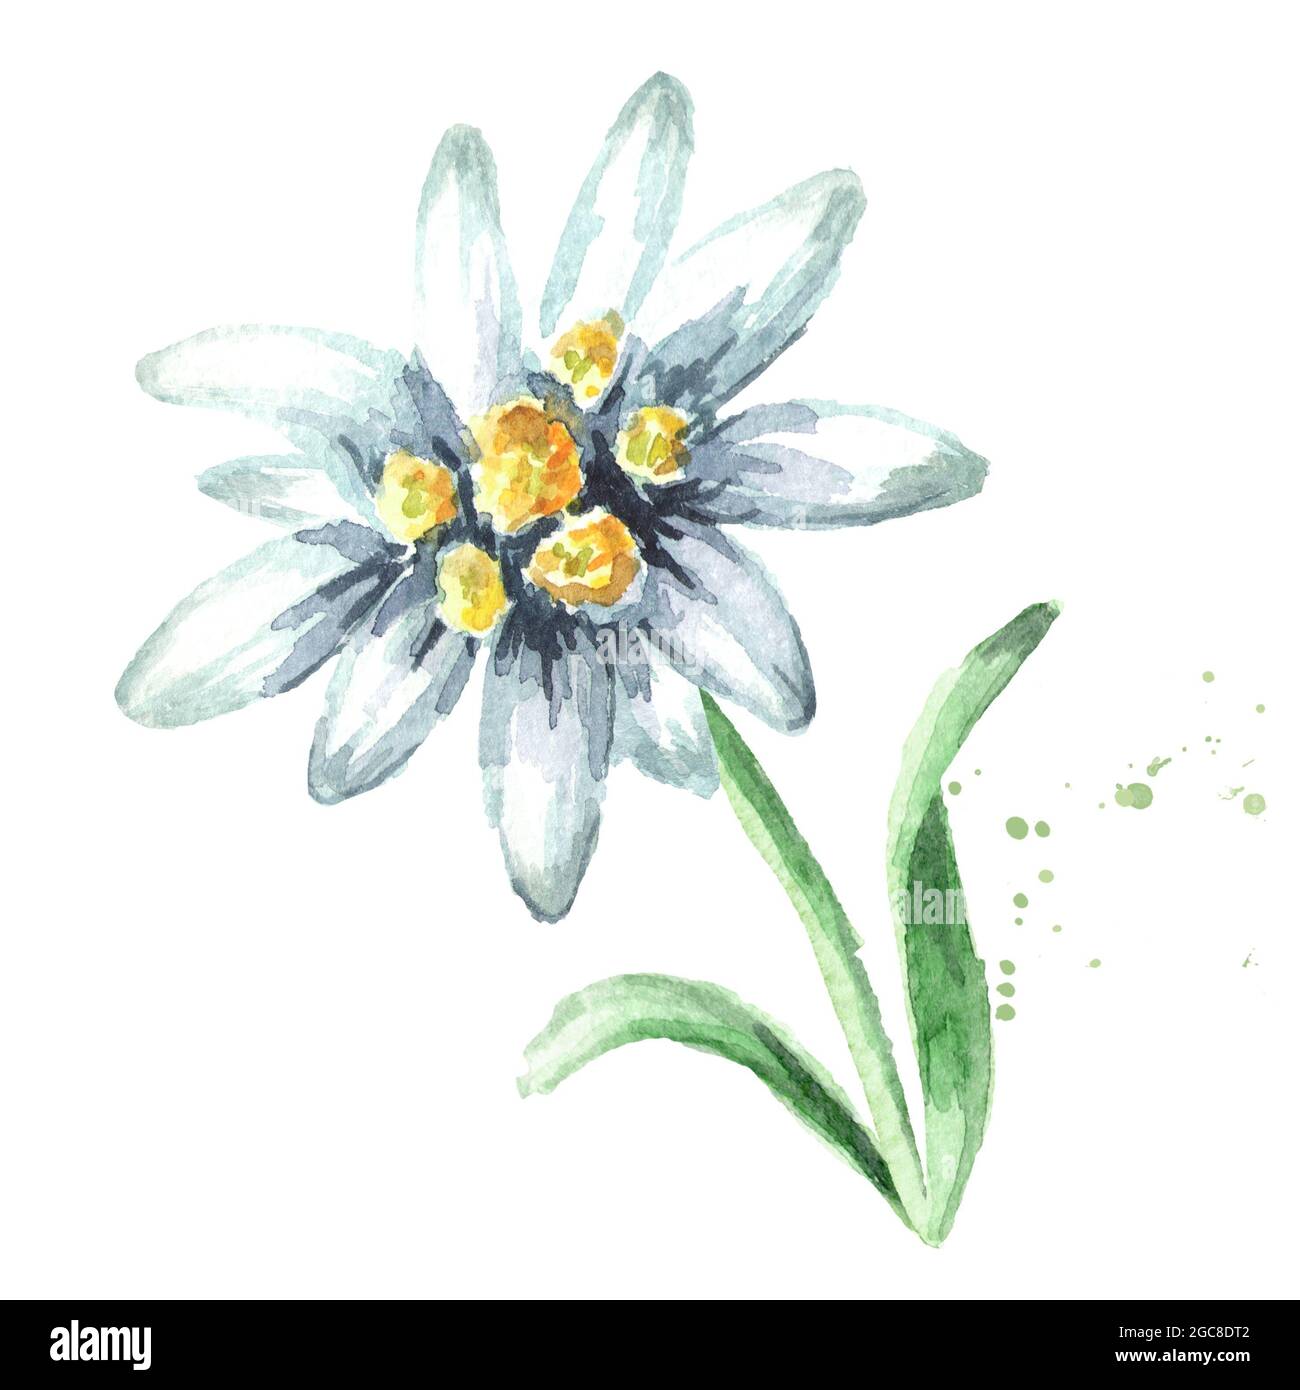 Edelweiss flower (Leontopodium alpinum) with leaves, Watercolor hand drawn illustration, isolated on white background Stock Photo